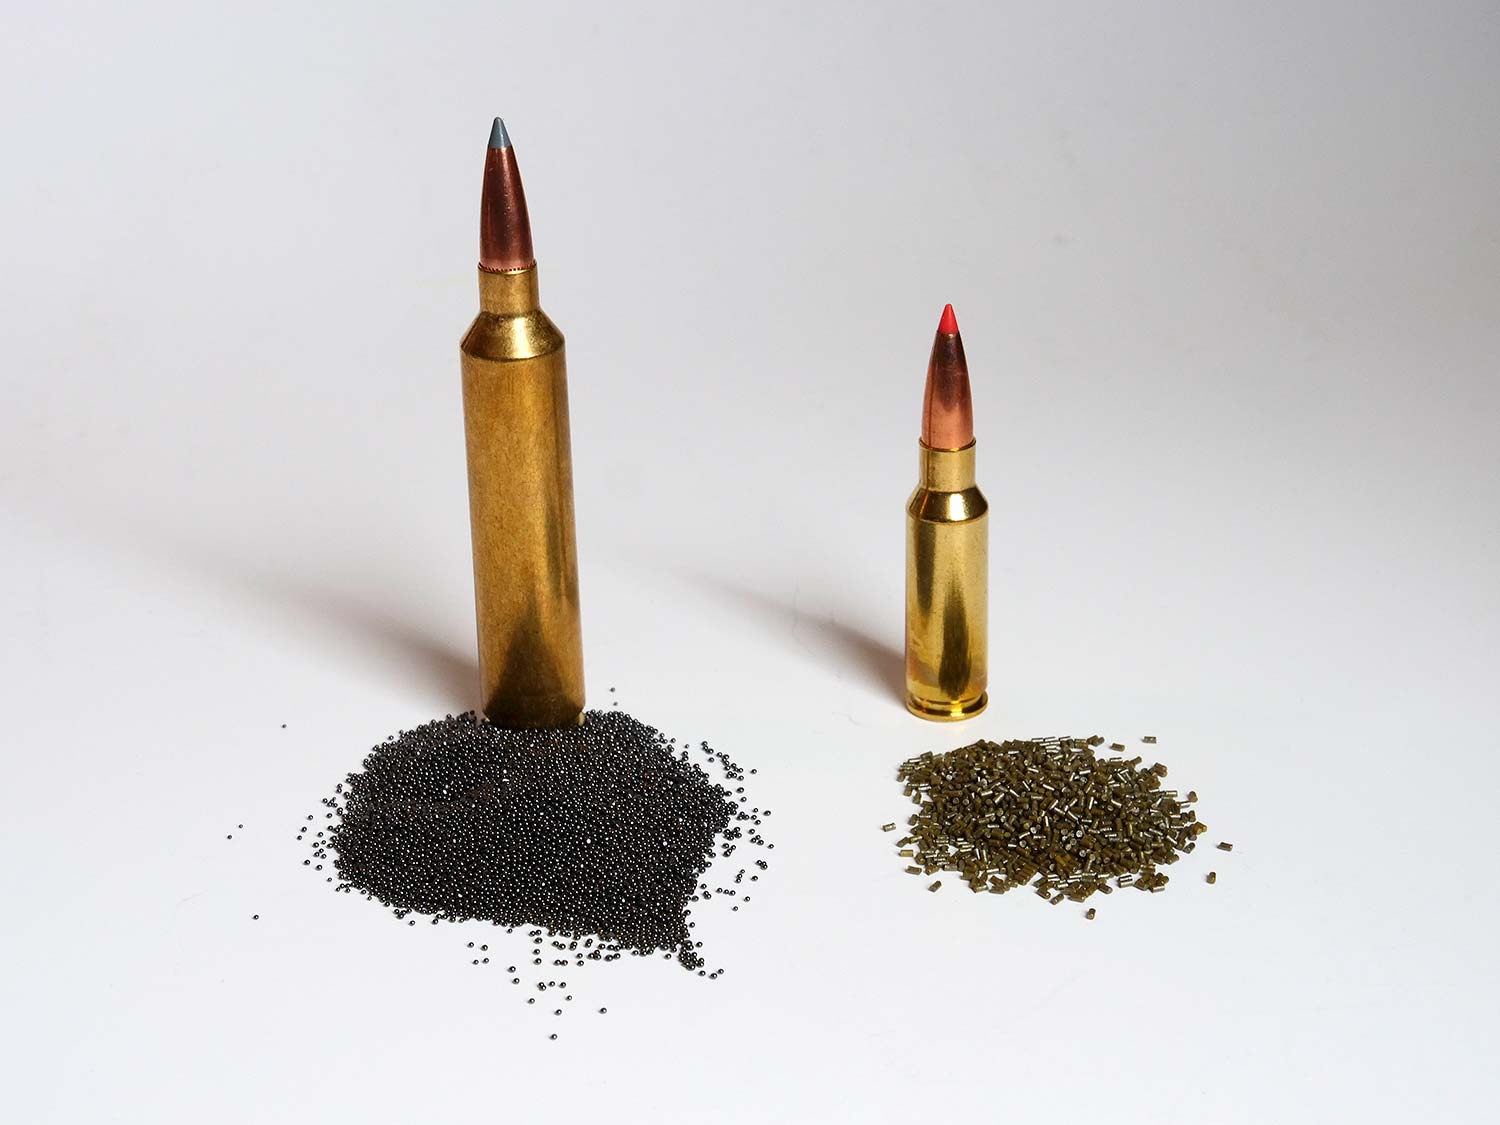 Two rifle bullets and their gun powder load poured out next two them.